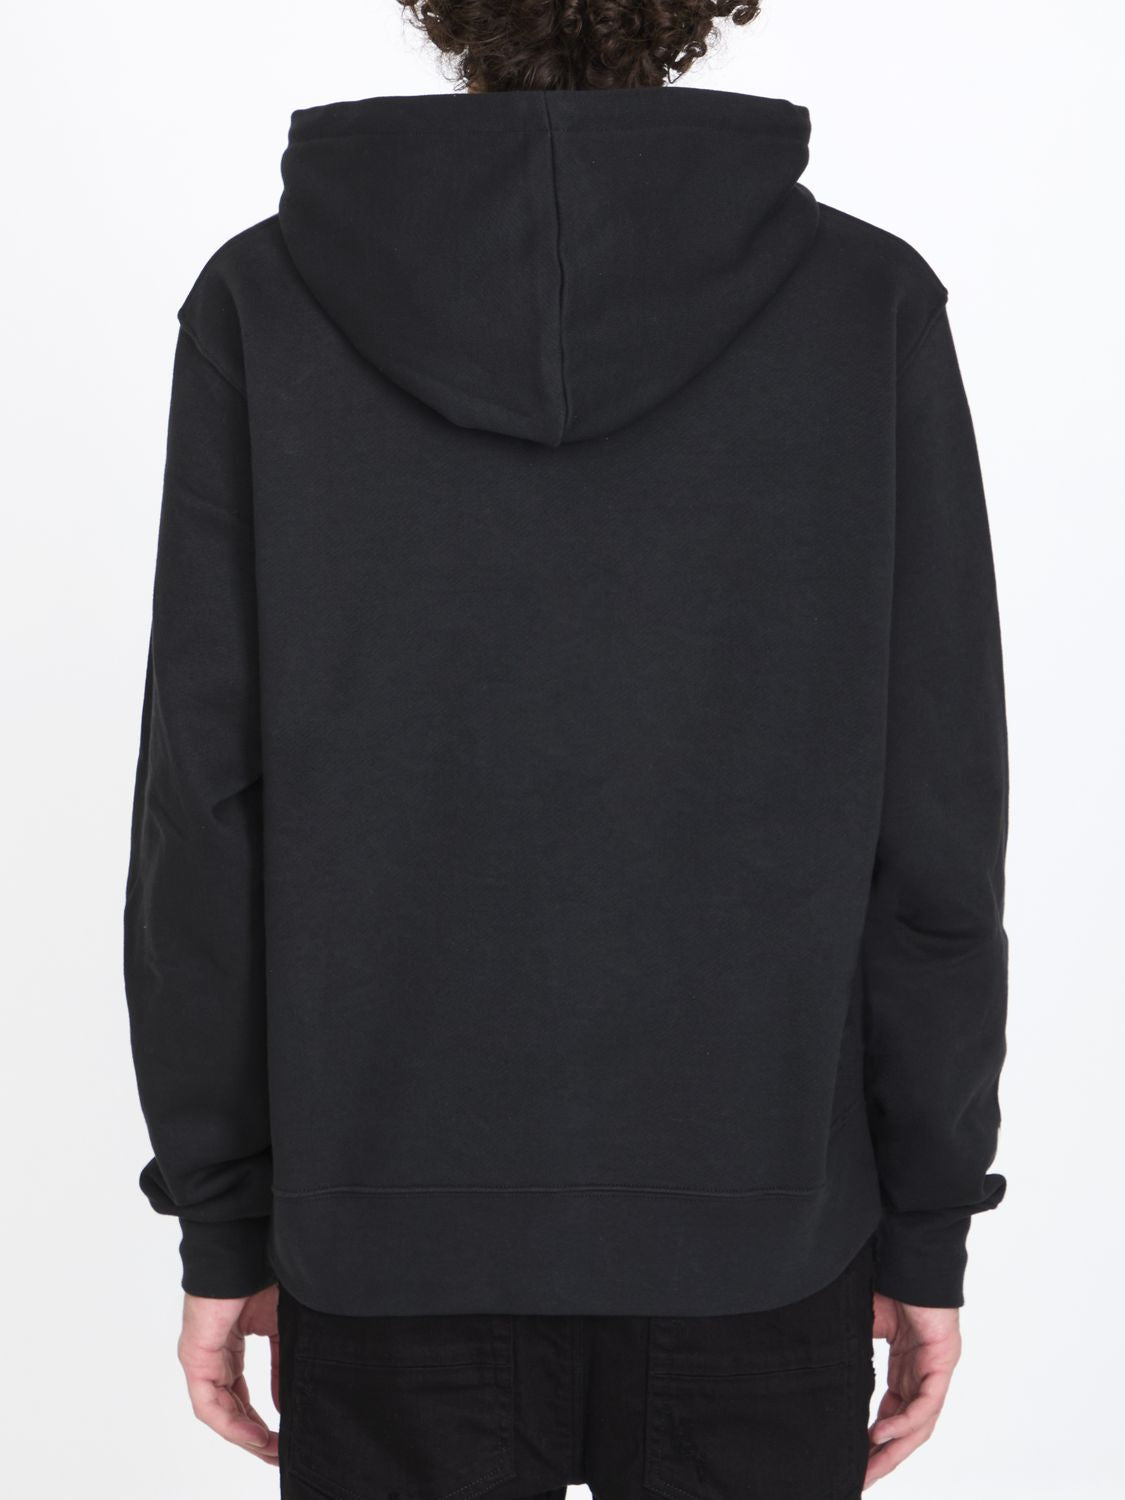 Staggered Logo Hoodie in Black Cotton Terry for Men